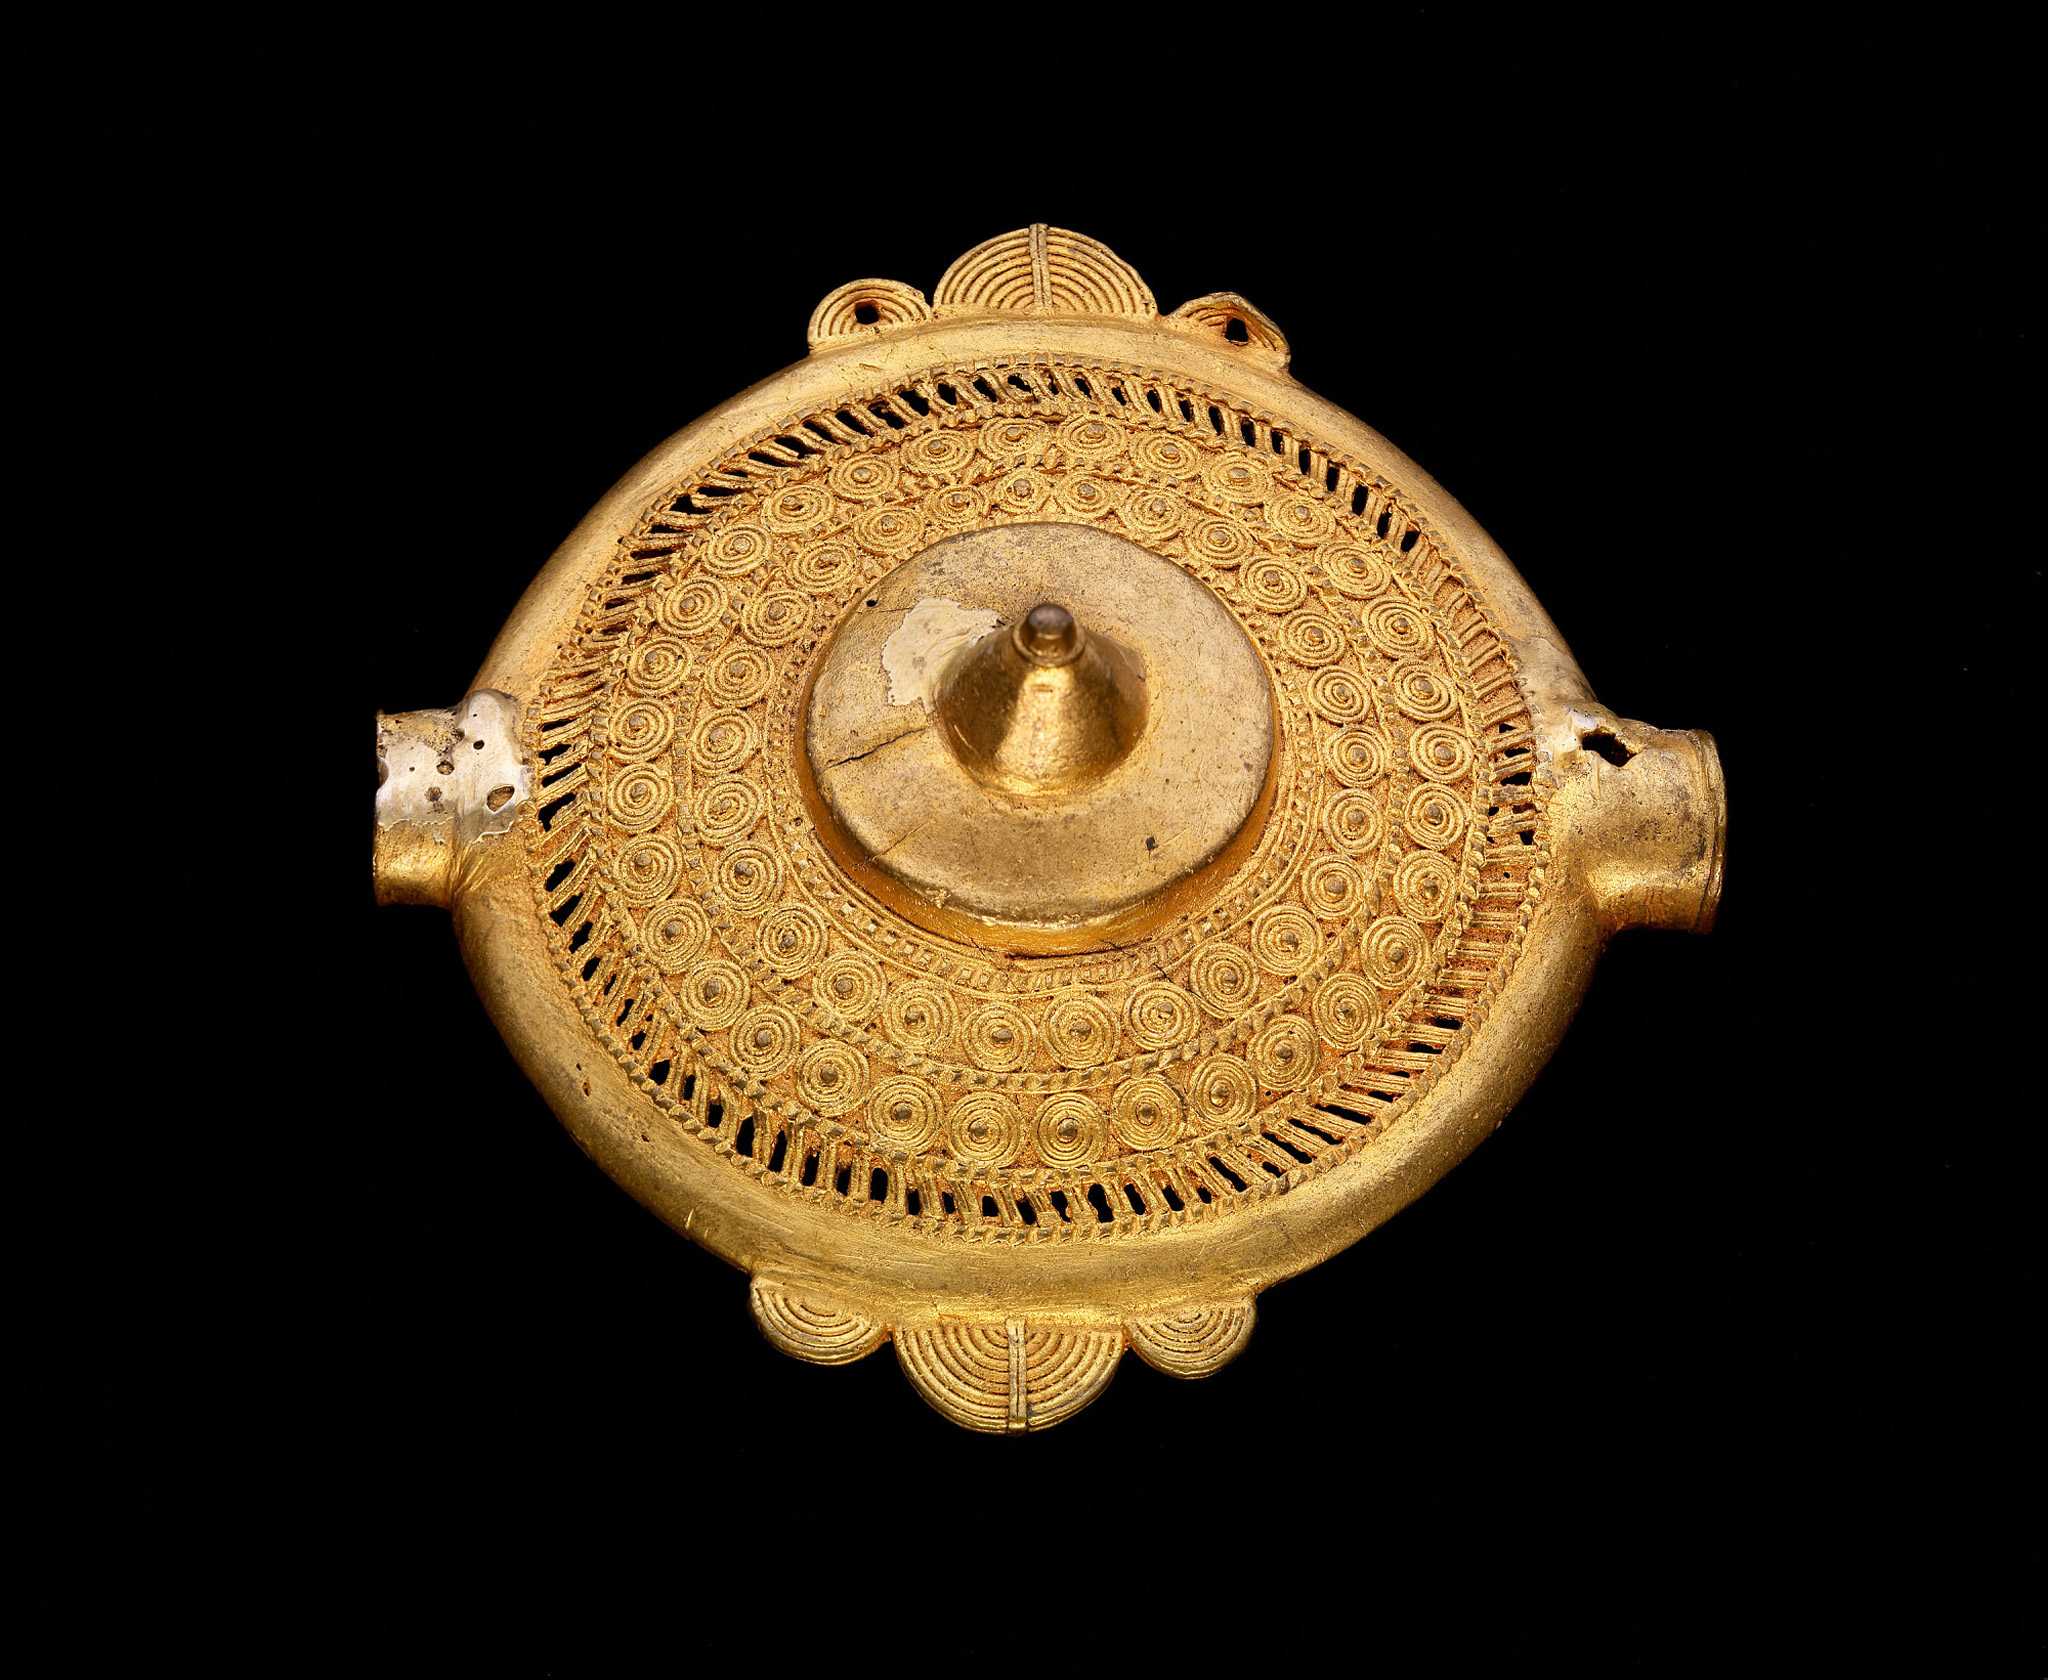 A gold pectoral disc with intricate spirals surrounding the middle point.